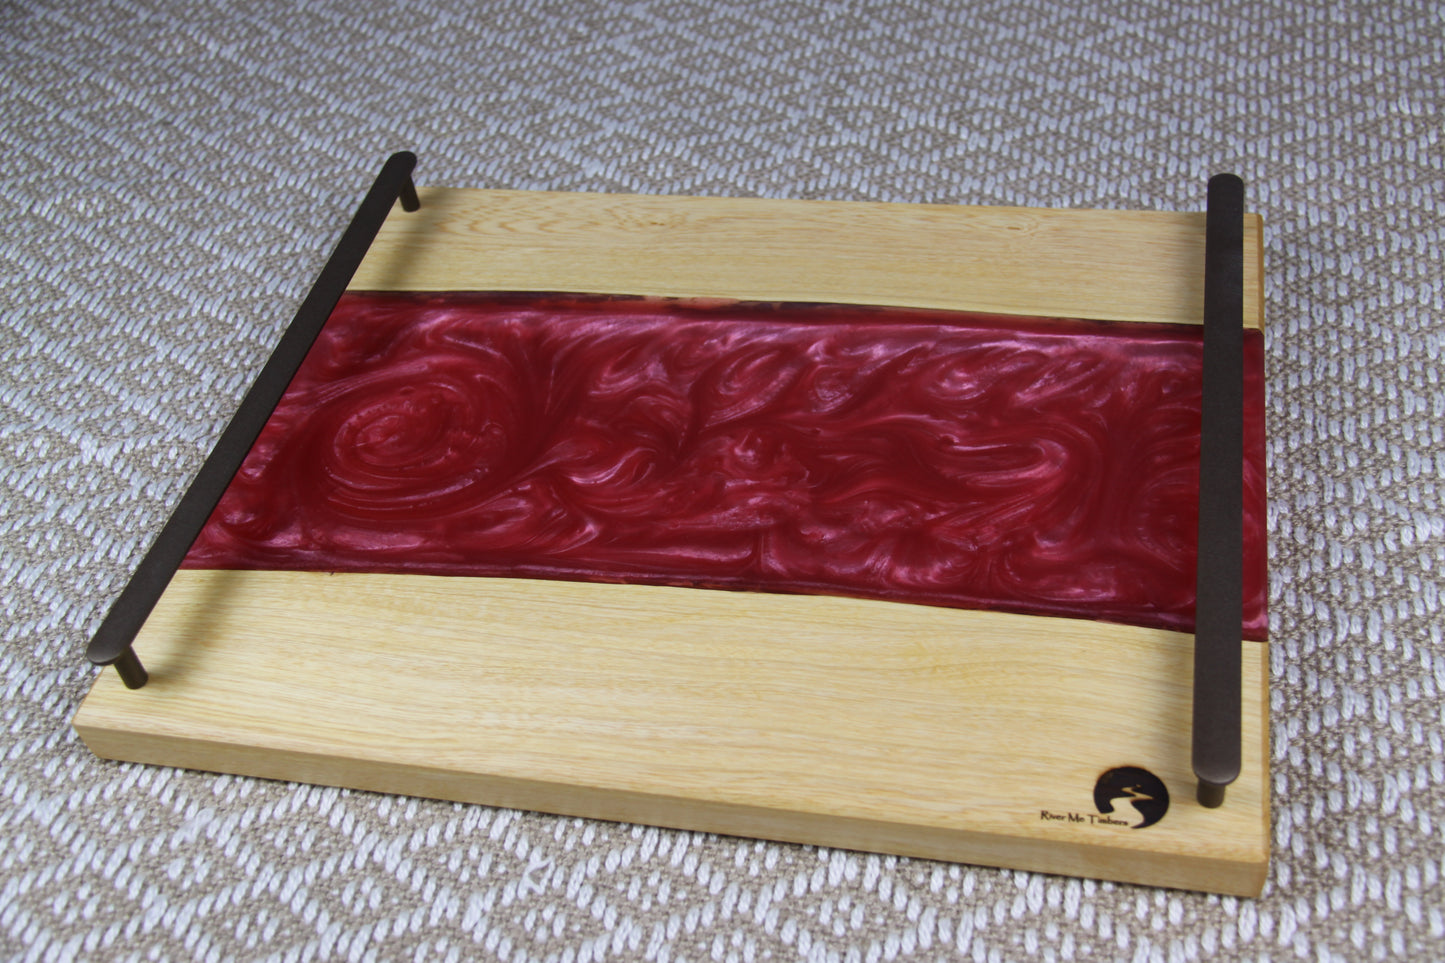 Serving Tray with Handles